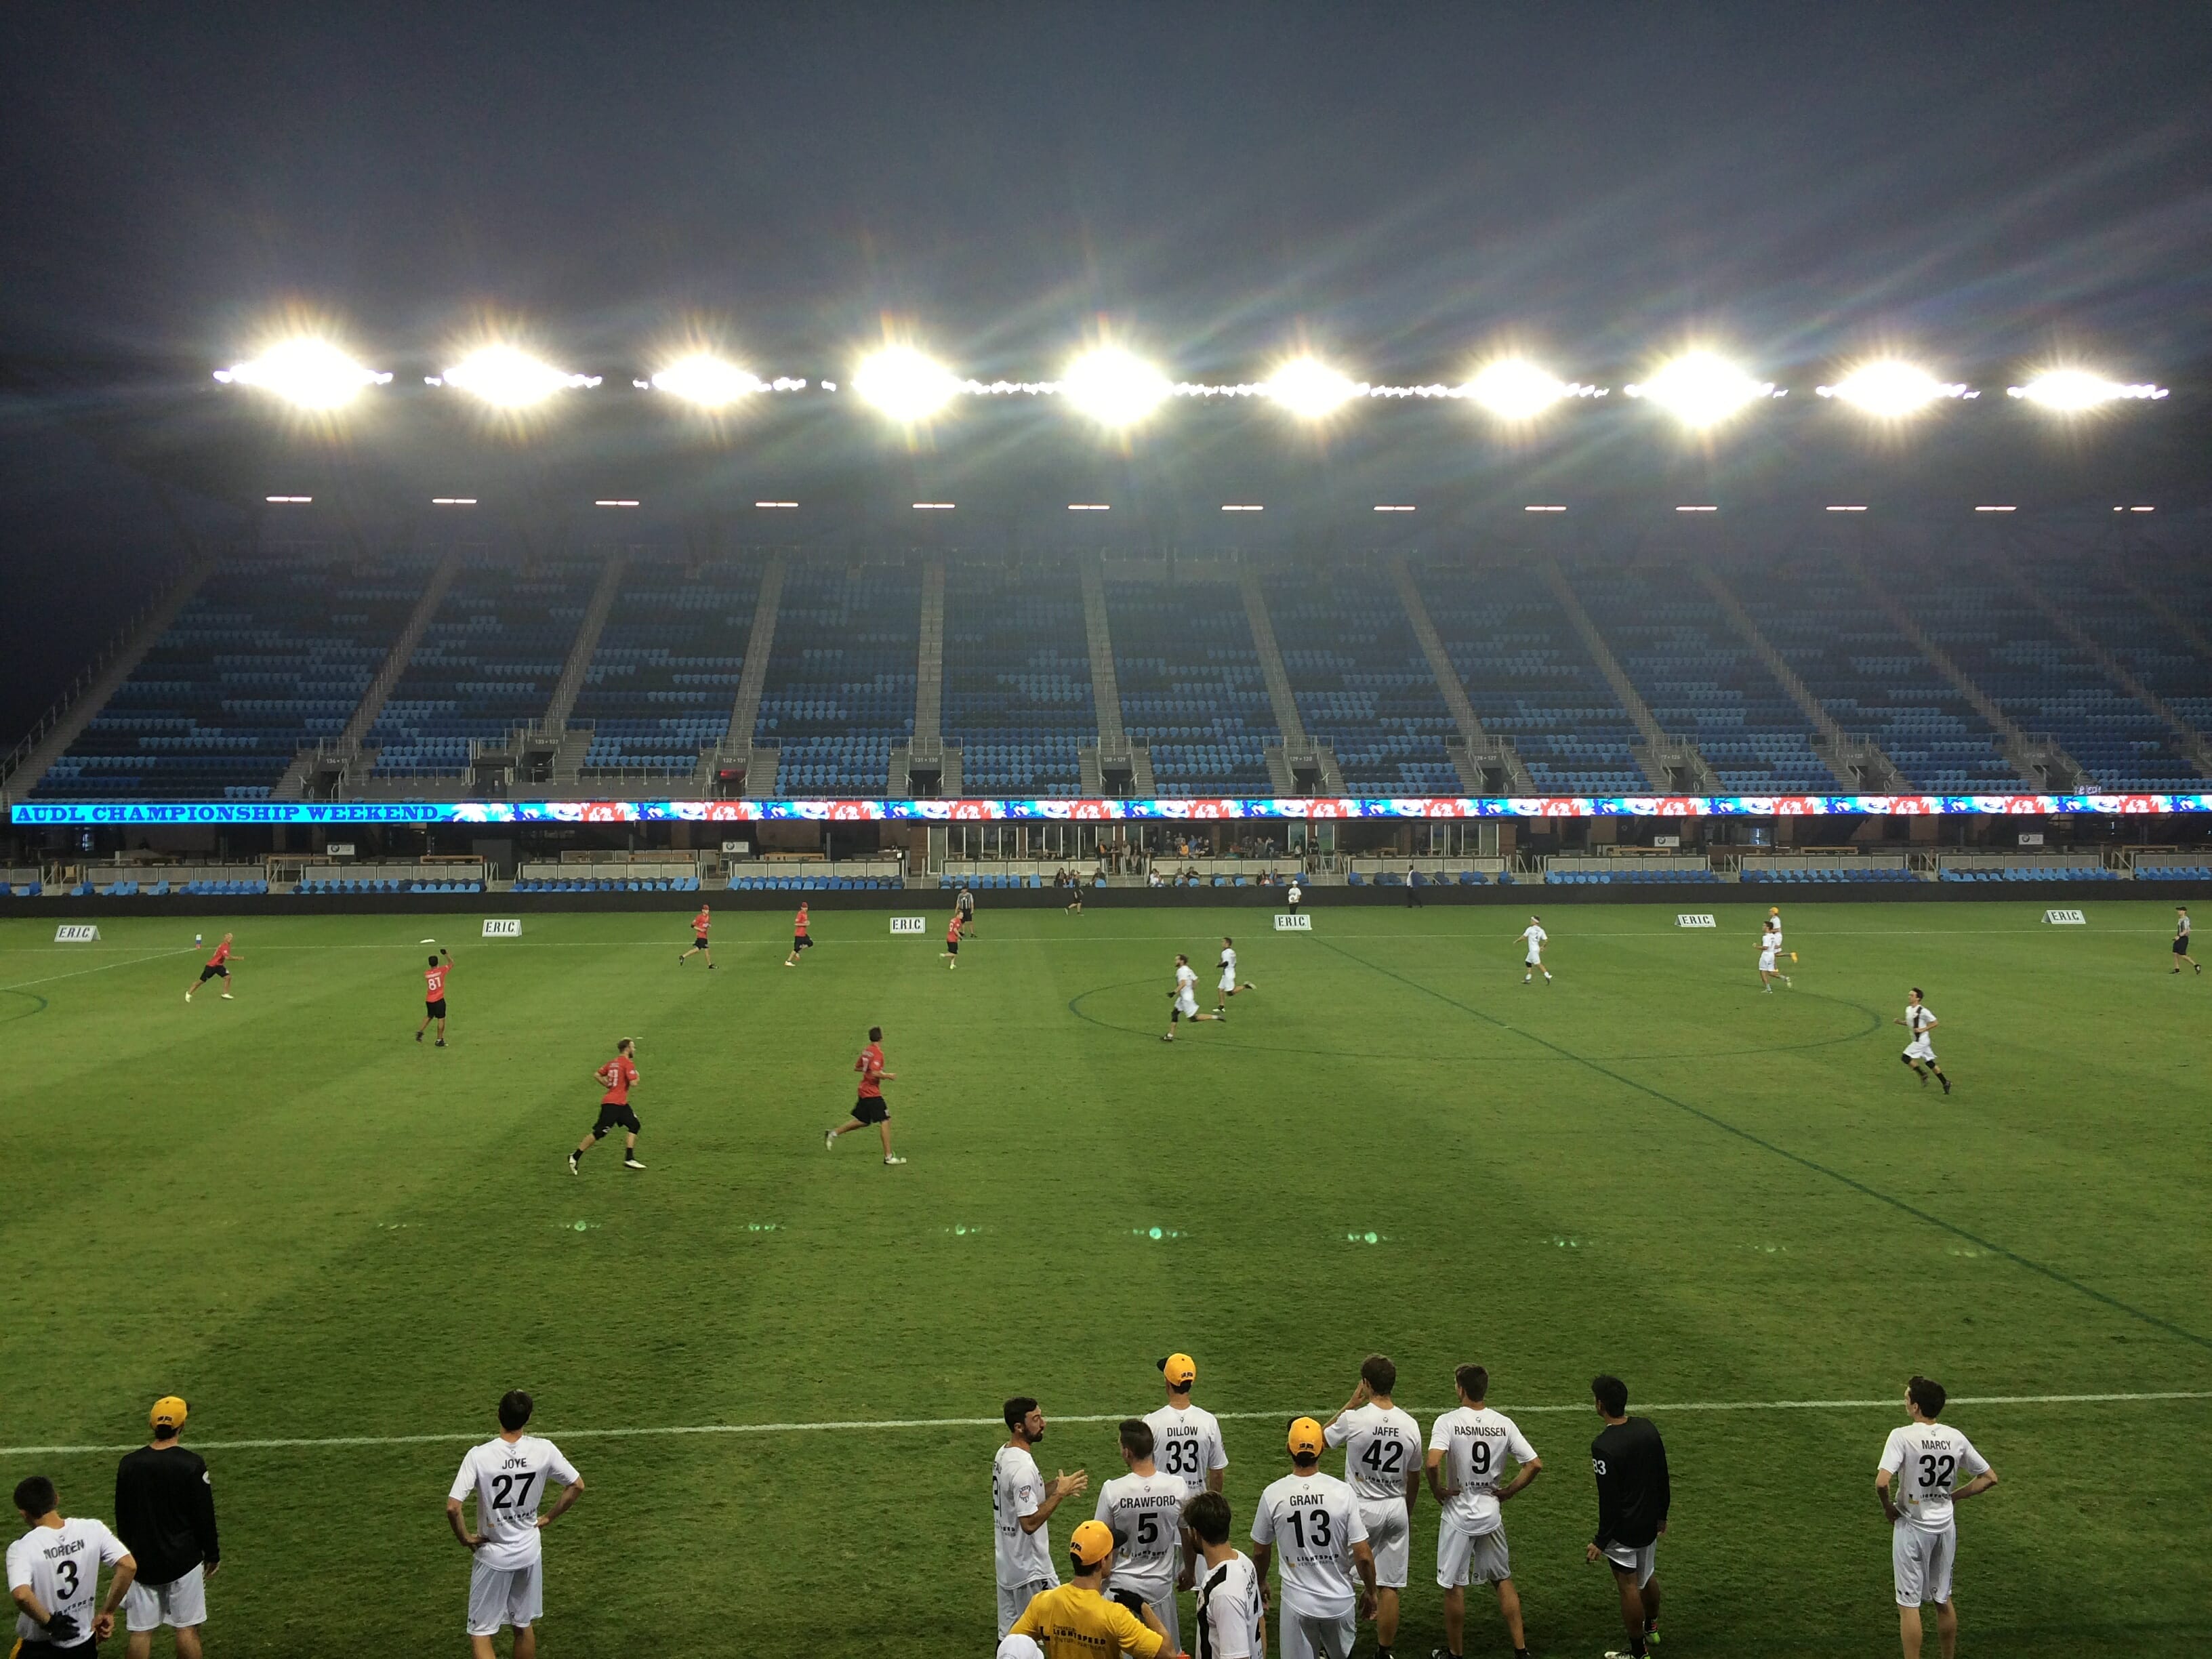 Watching the teams play under the lights in a stadium of Avaya's size was awesome.